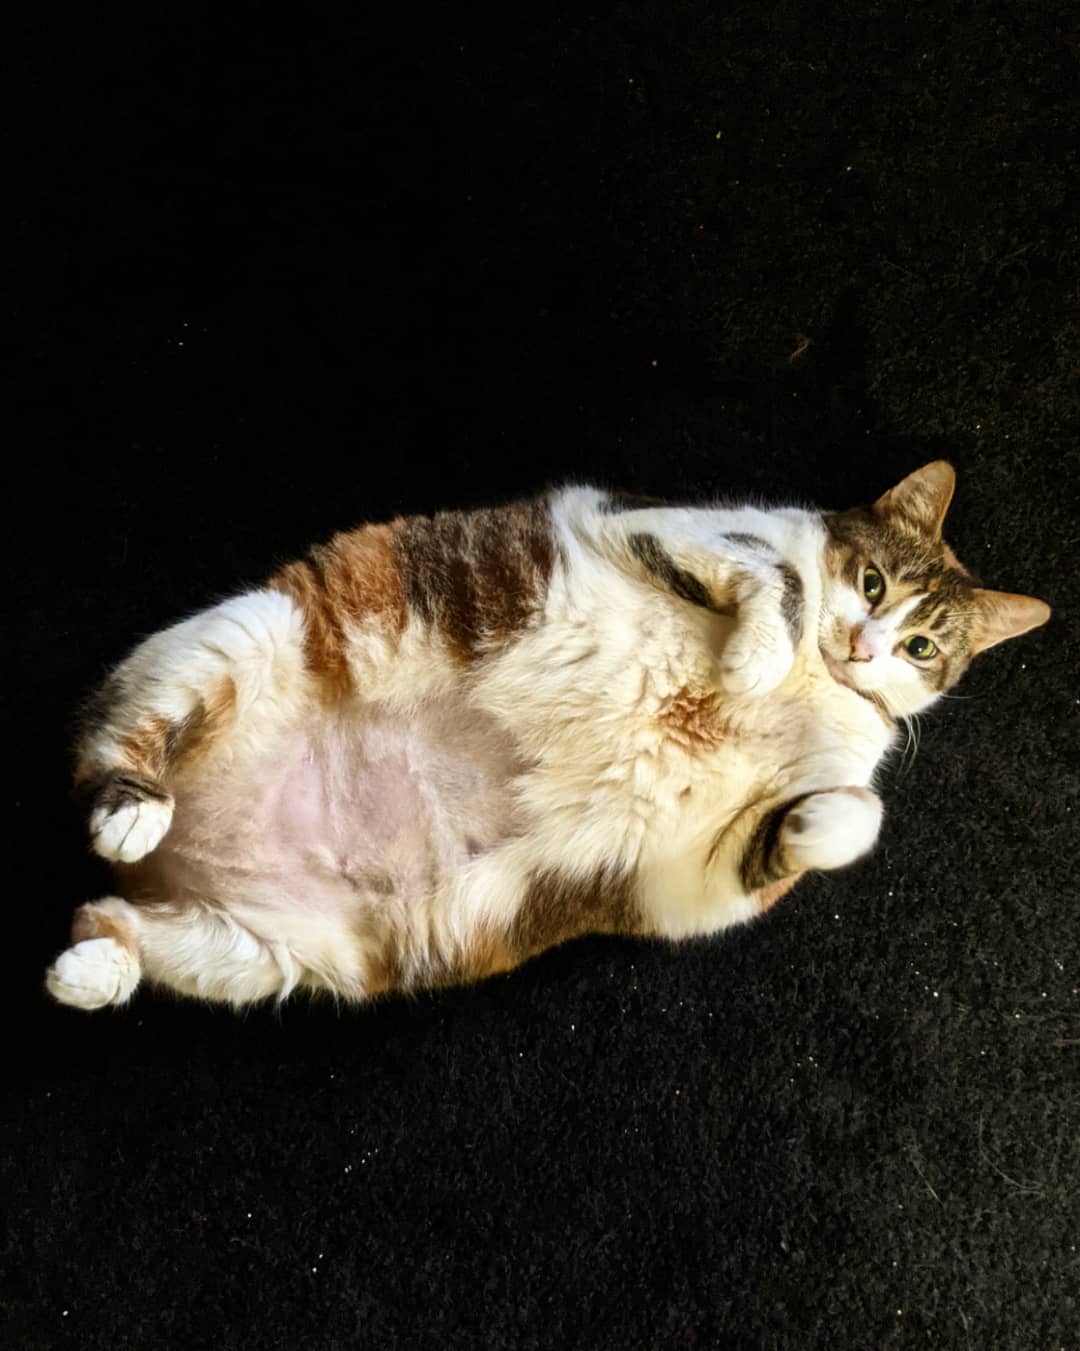 Adopted a second chonker. Juniper weighs in at 15.5lbs and starts her weight loss journey in her new home!